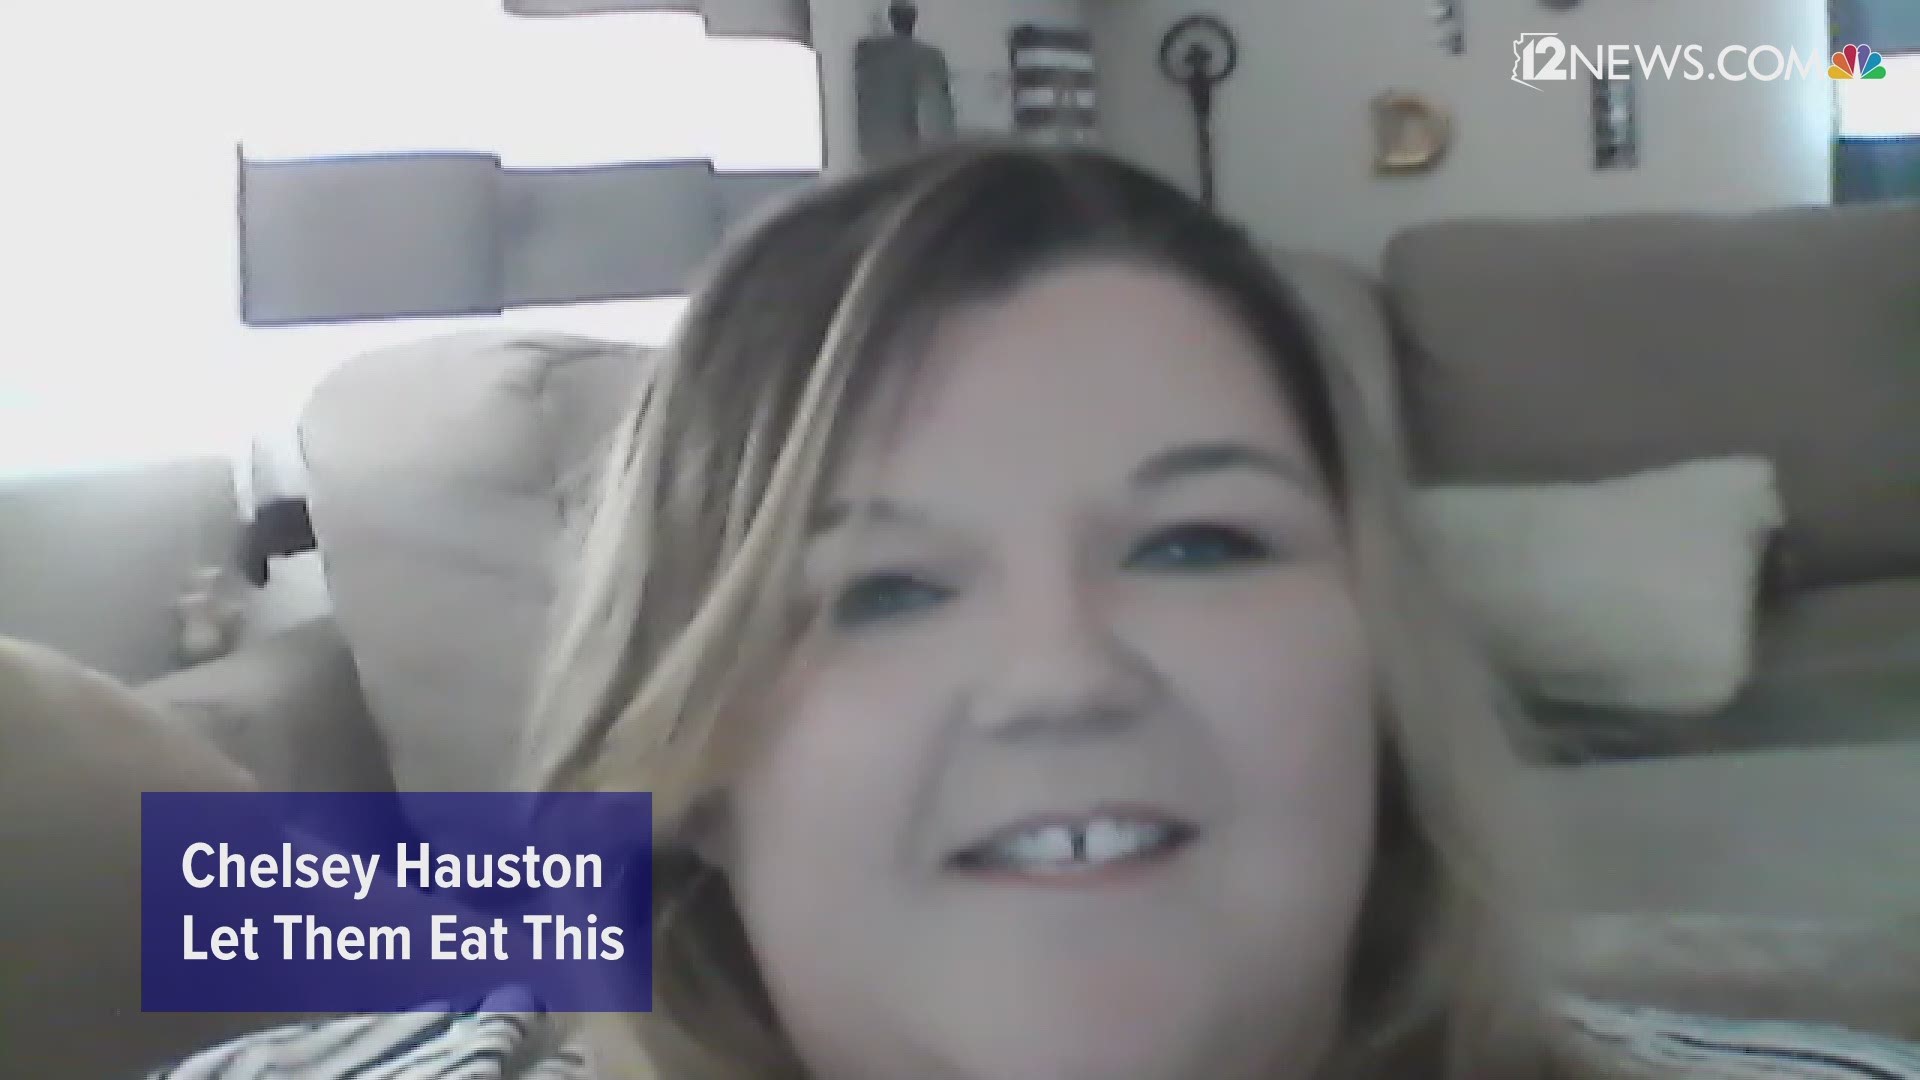 Chelsey Hauston runs the blog, Let Them Eat This. She shares a story about the time taking her mom for her first taste of Korean BBQ.